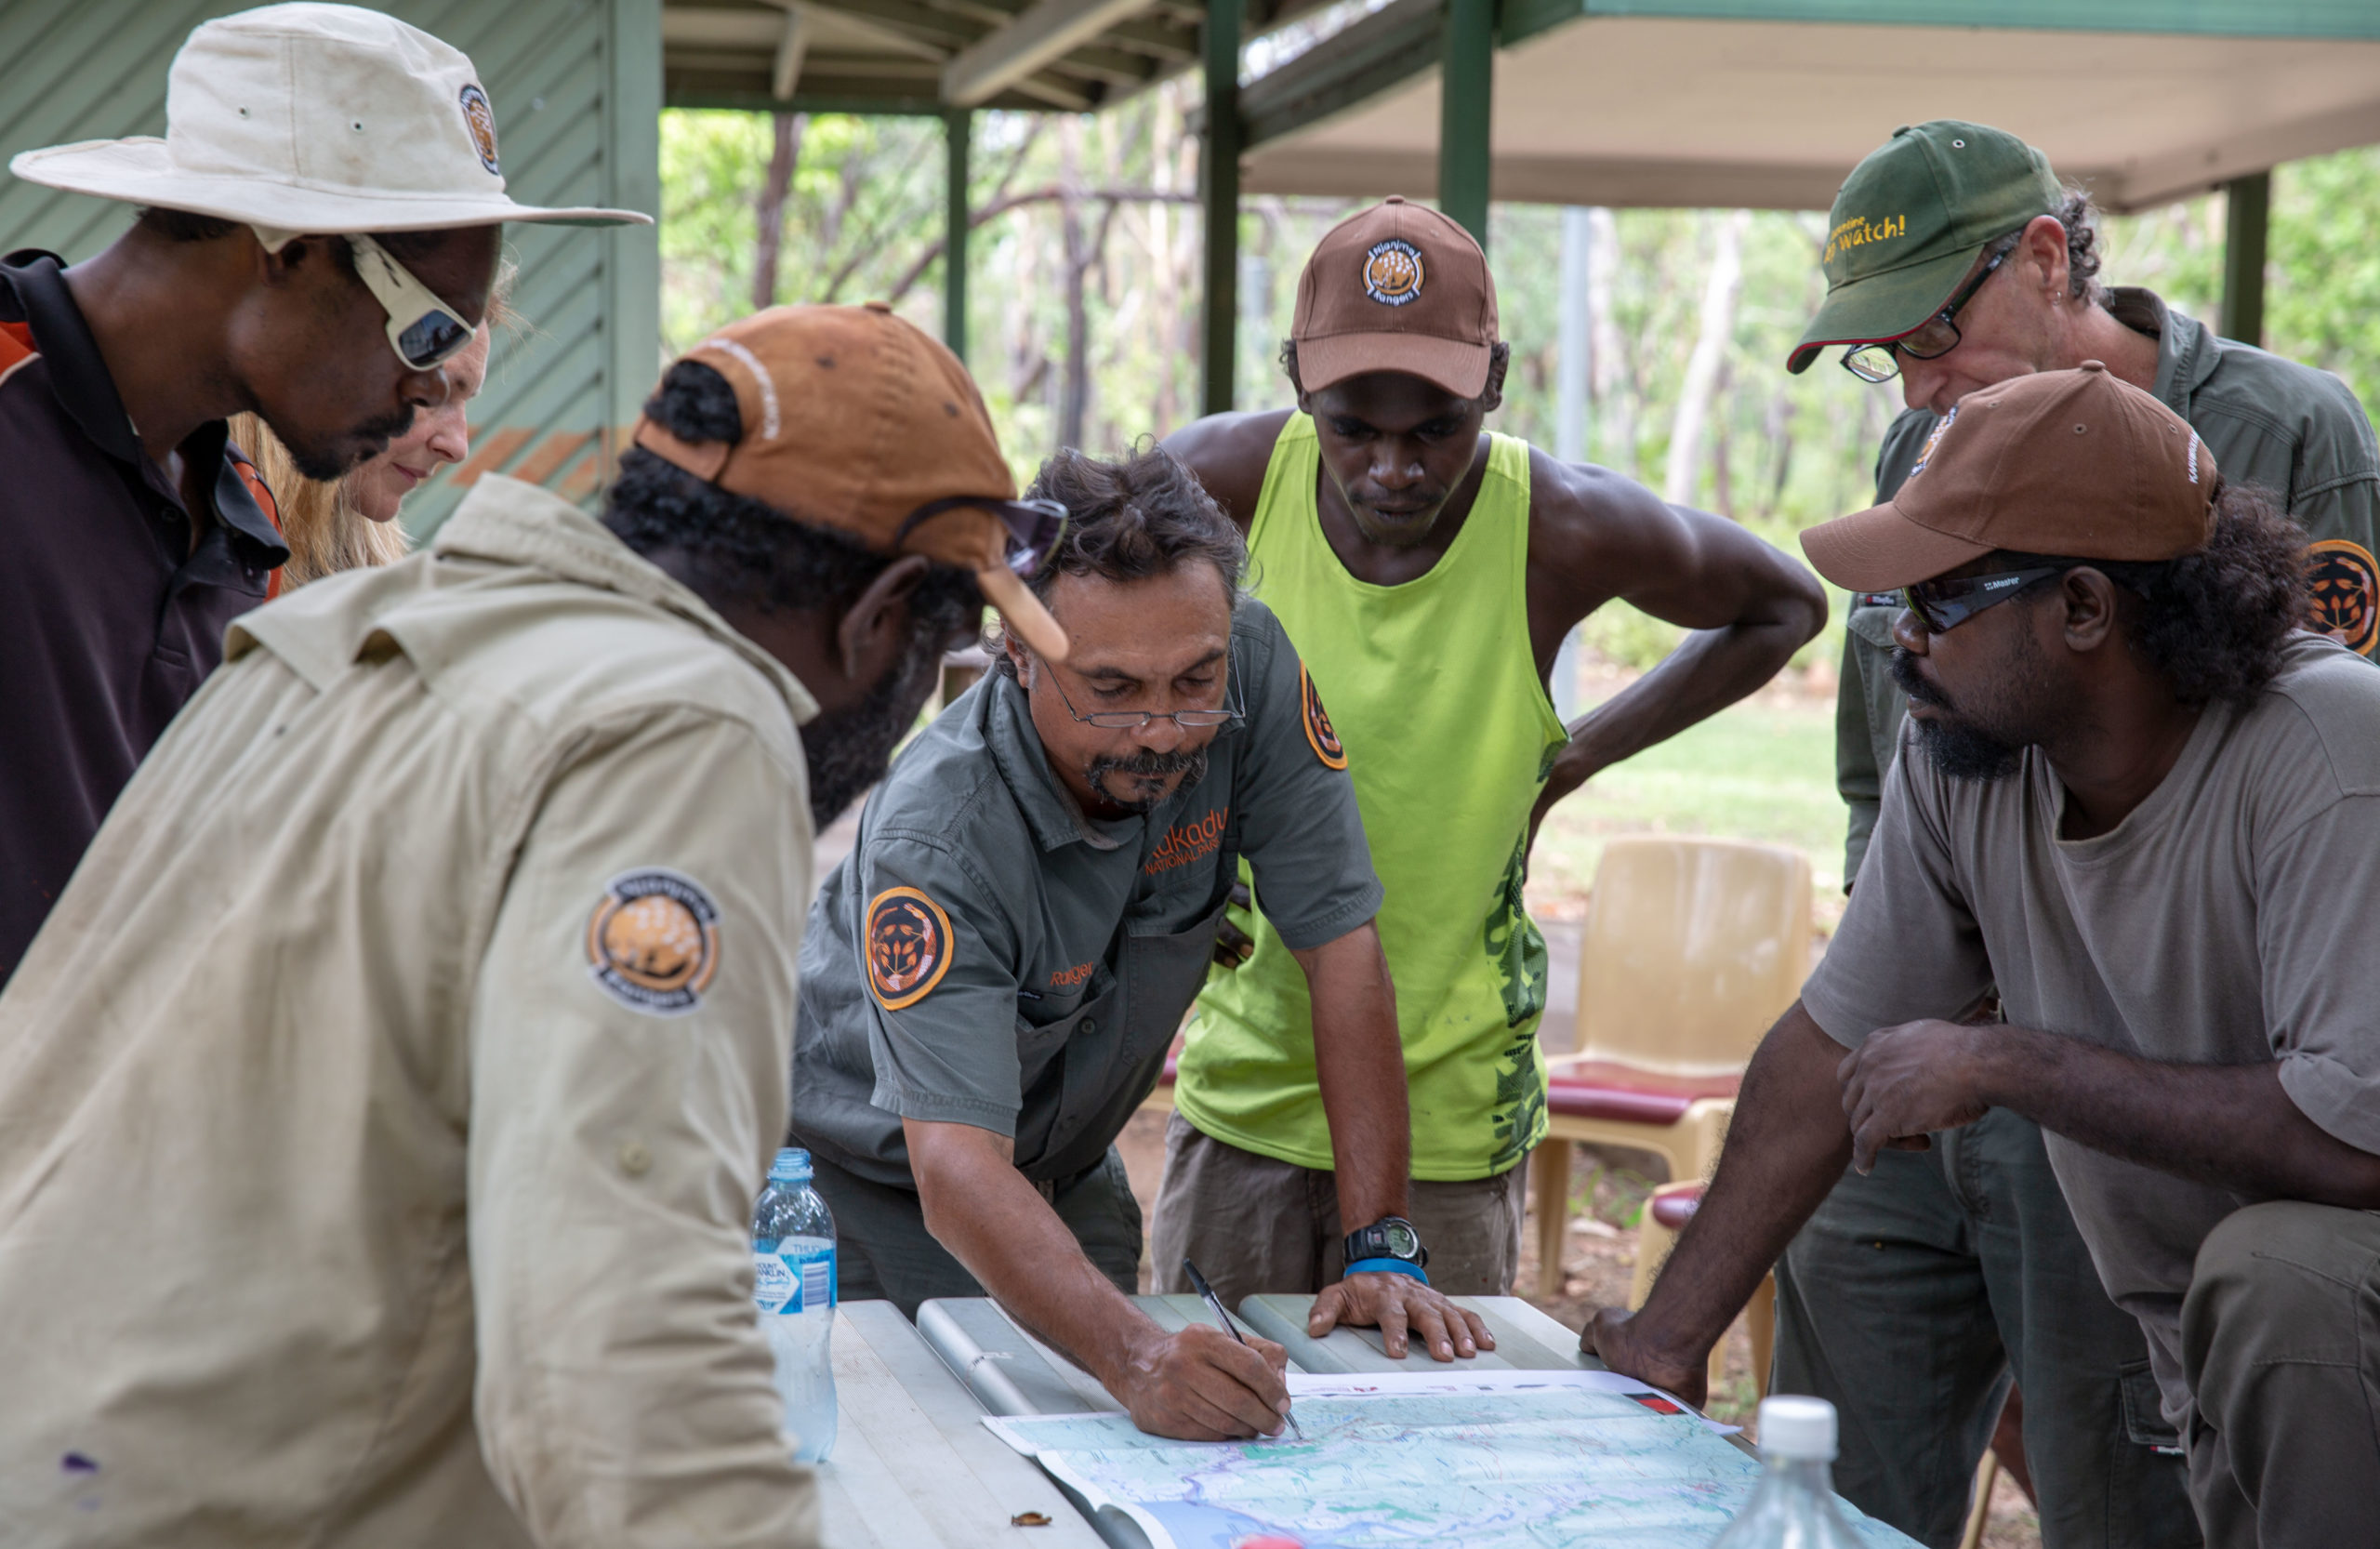 The project worked with Bininj/Mungguy Traditional Owners to develop and apply indicators for the cultural-ecosystem health of the floodplain.